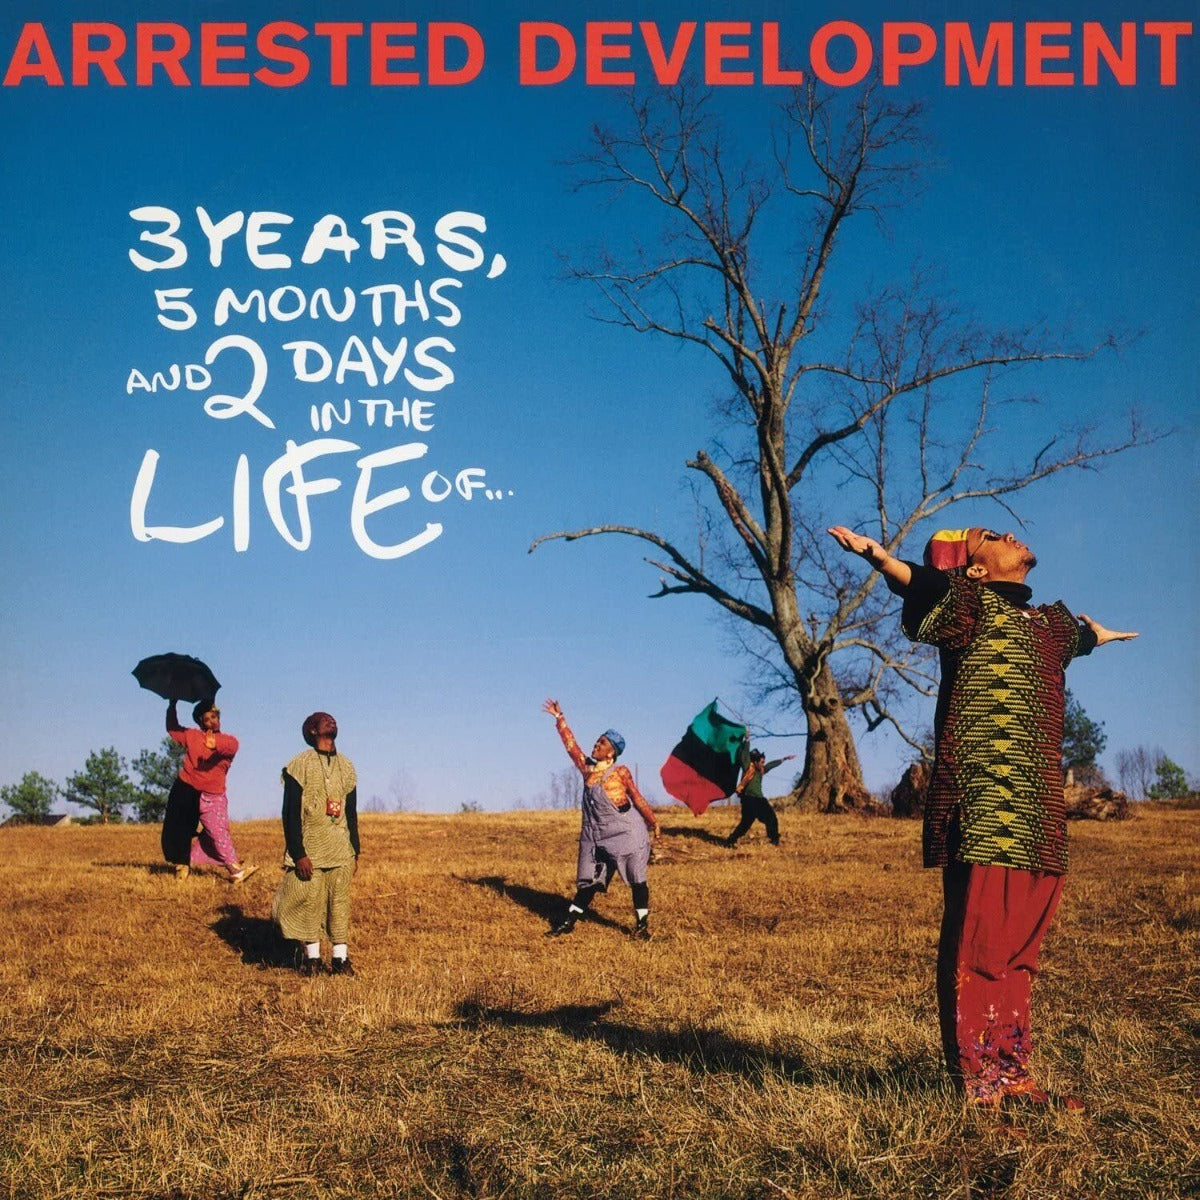 Arrested Development 3 Years, 5 Months & 2 Days In The Life Of… Vinyl